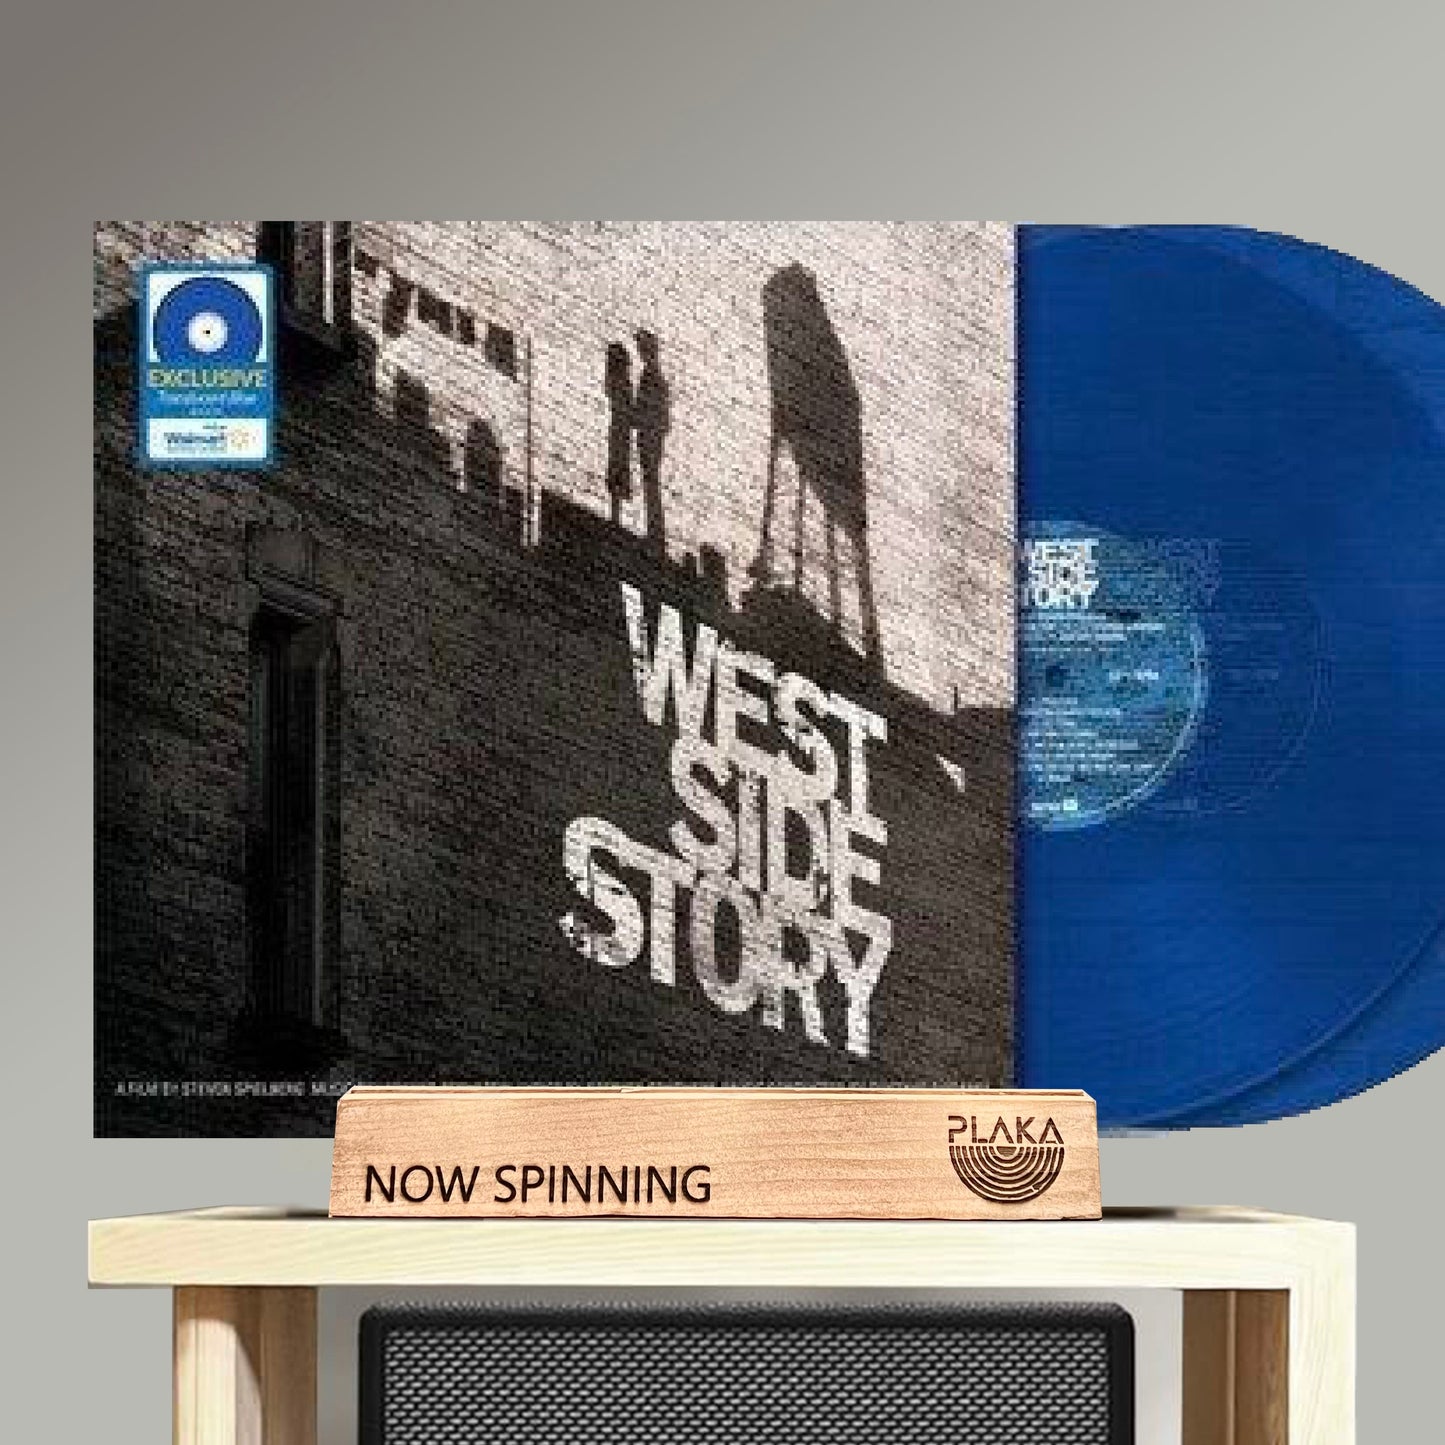 West Side Story - OST